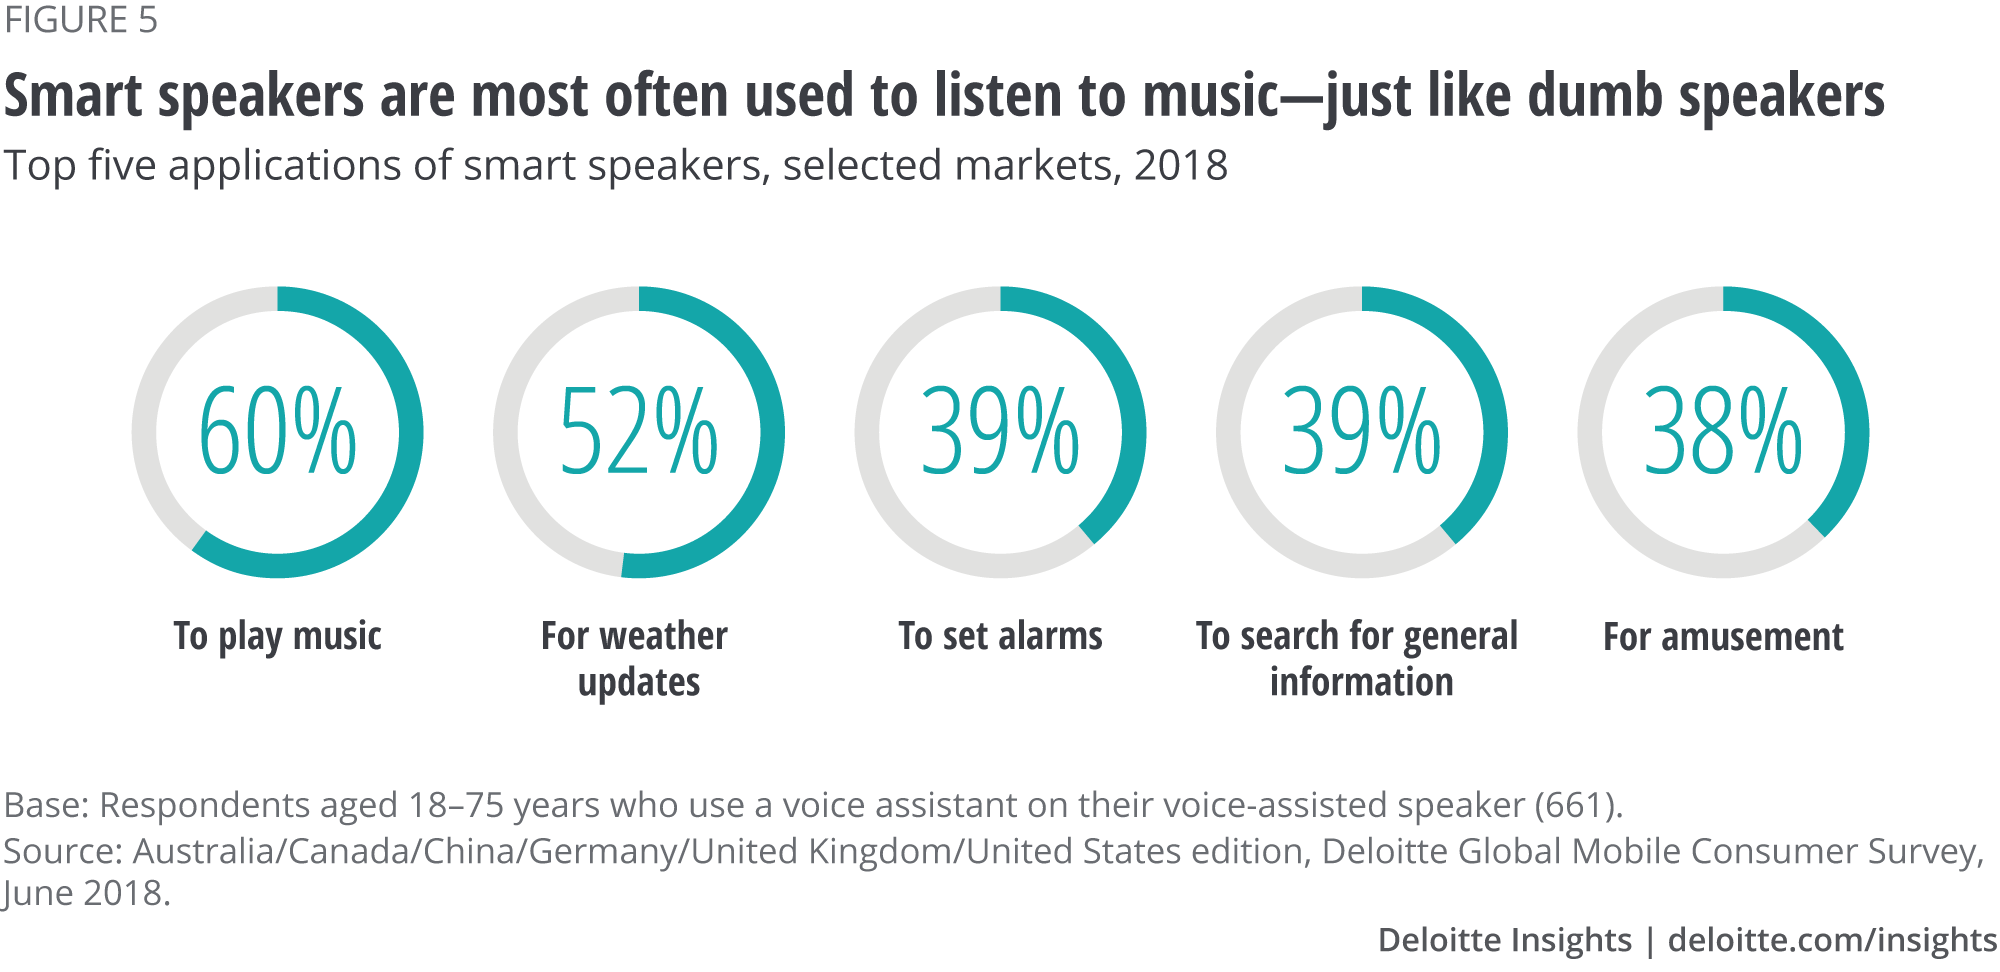 Smart speakers are most often used to listen to music—just like dumb speakers